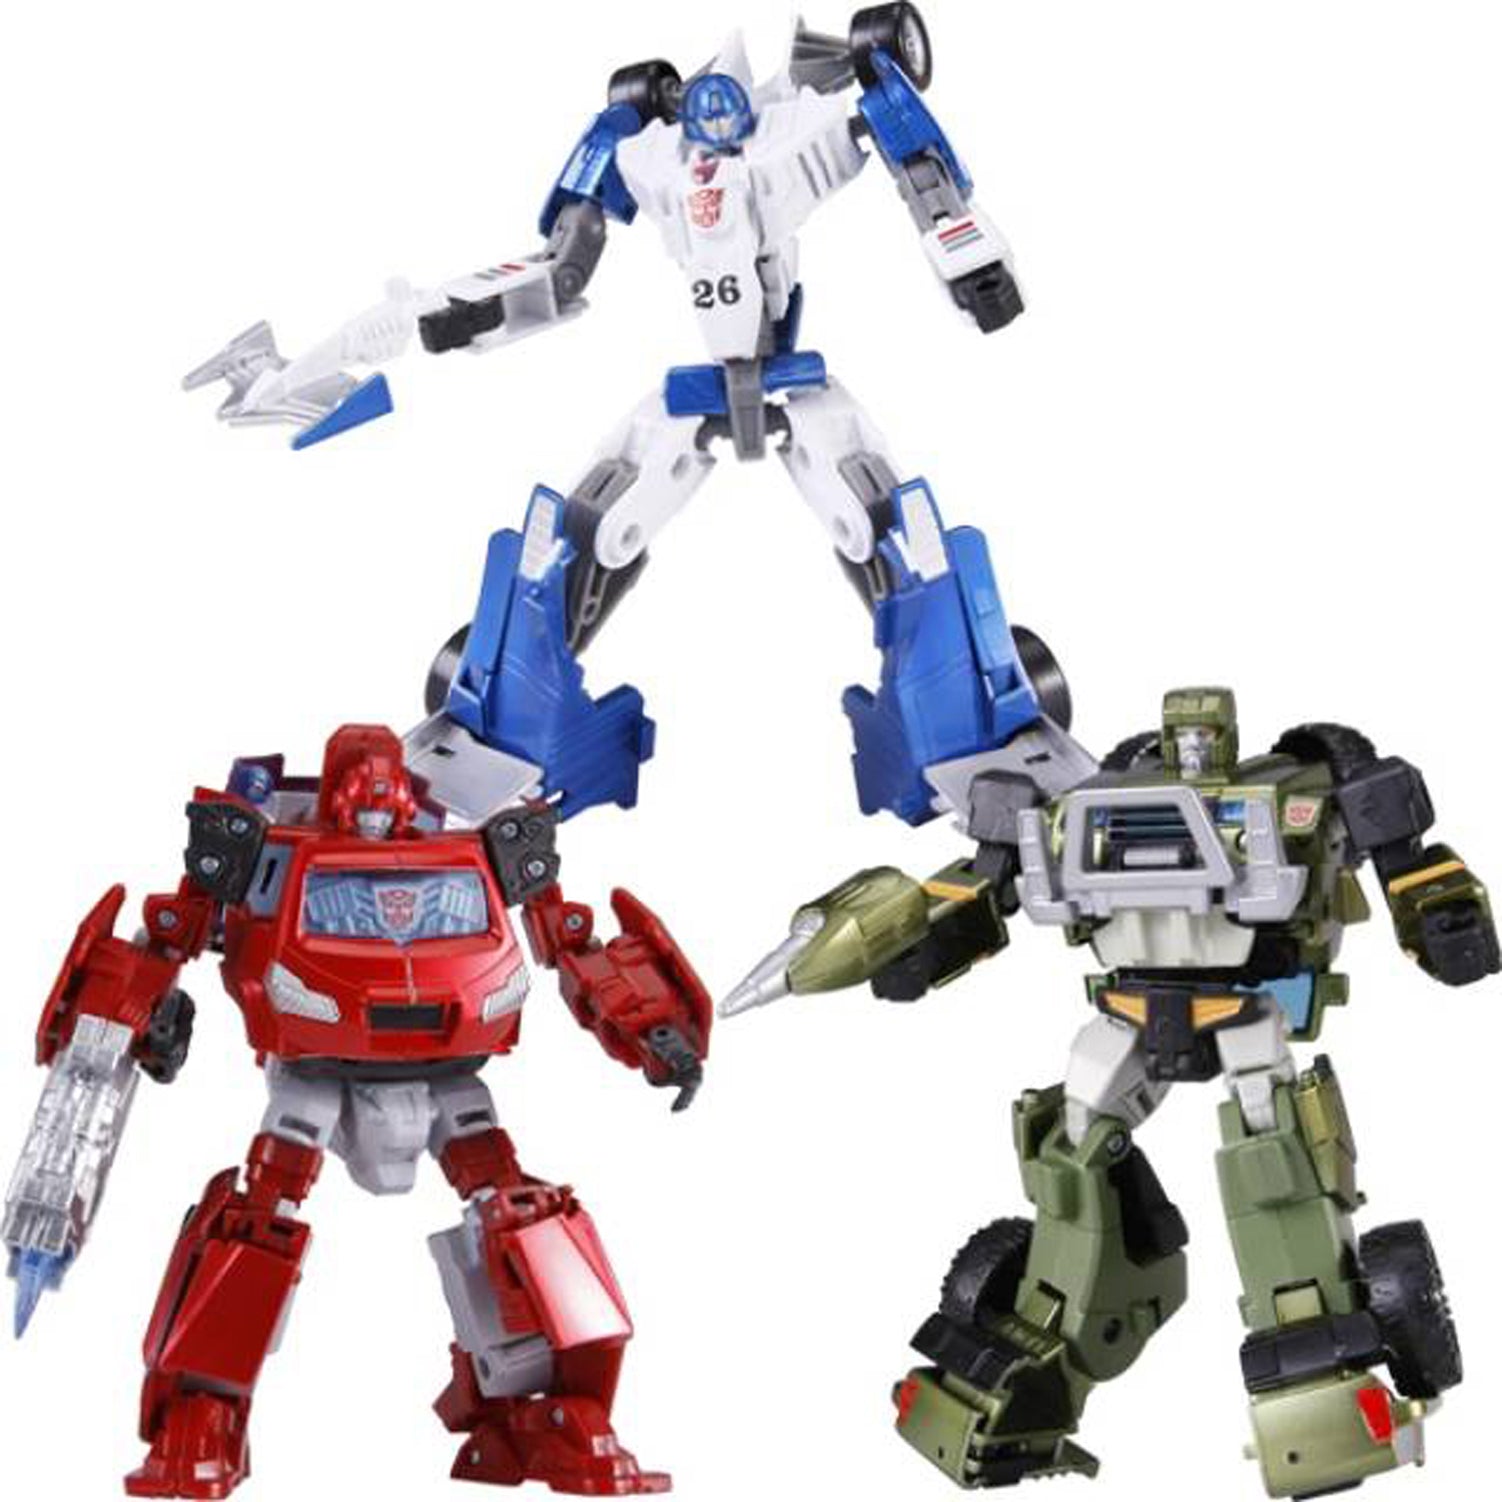 Transformers Henkei Classic Specialist Autobots Ionhide, Hound, Mirage 3-Pack Action Figure Set Asia Exclusive